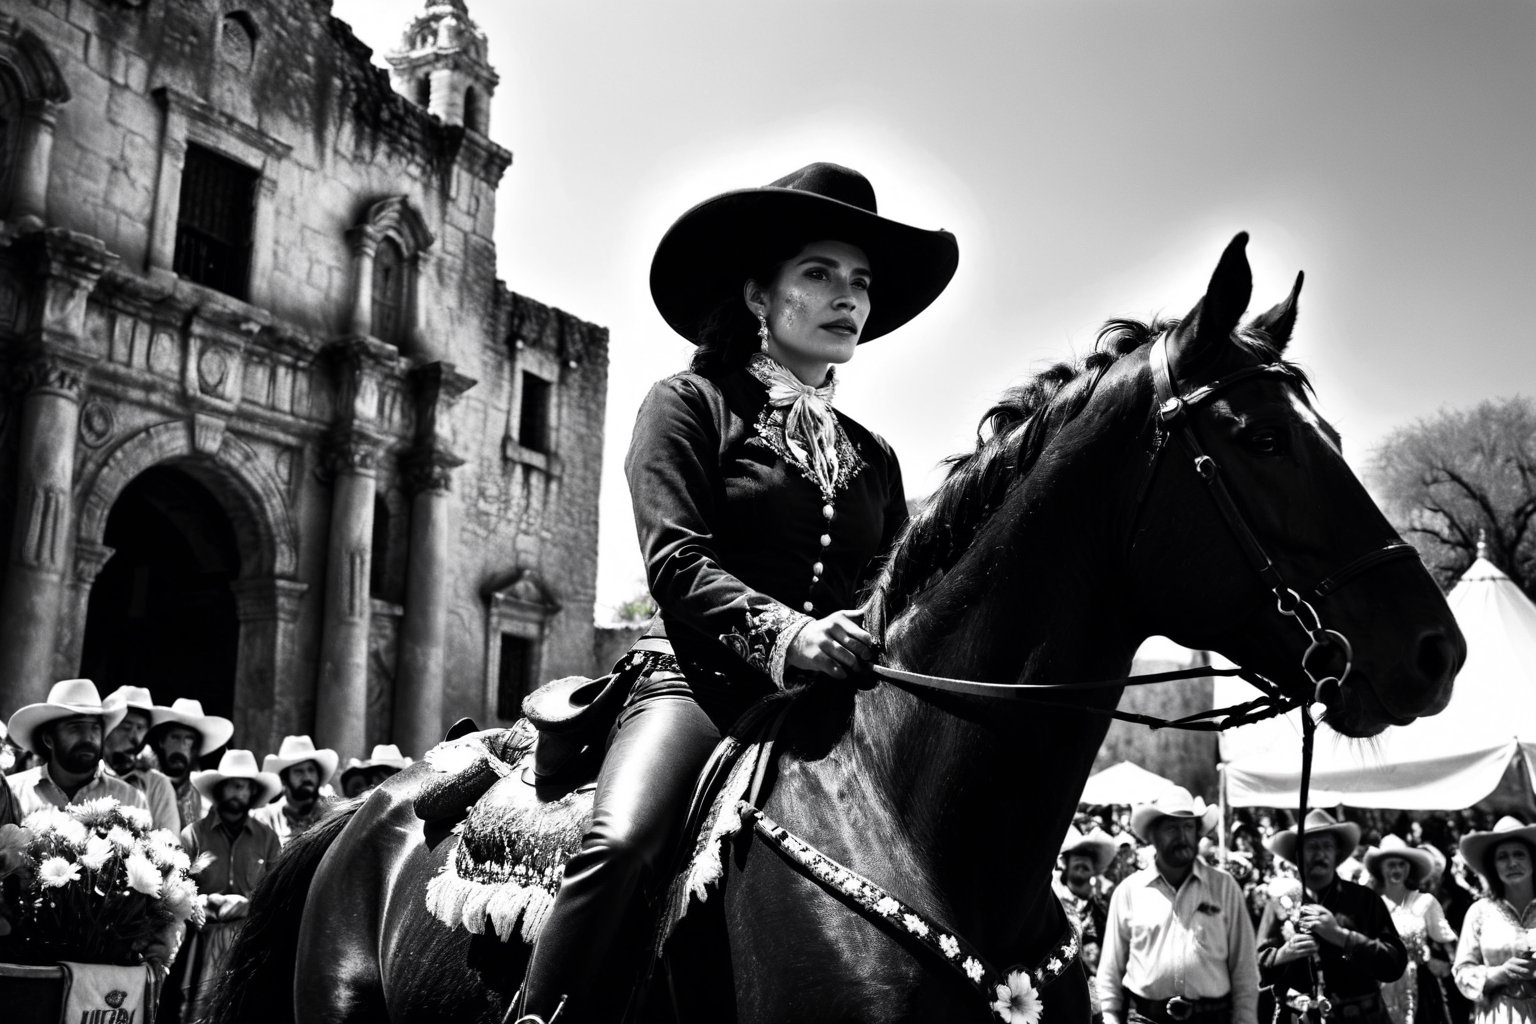 ansel adams style photo of a nude female charro rider looking up in front of the alamo, mission alamo in background, battle of flowers parade, horse with flowers, modern rainbow splatter paint, monet style, artistic layout and feel, high contrast image, 4k image, clear faces, good faces, in focus, black and white image, fiesta, in front of the alamo,SD 1.5, naked, 